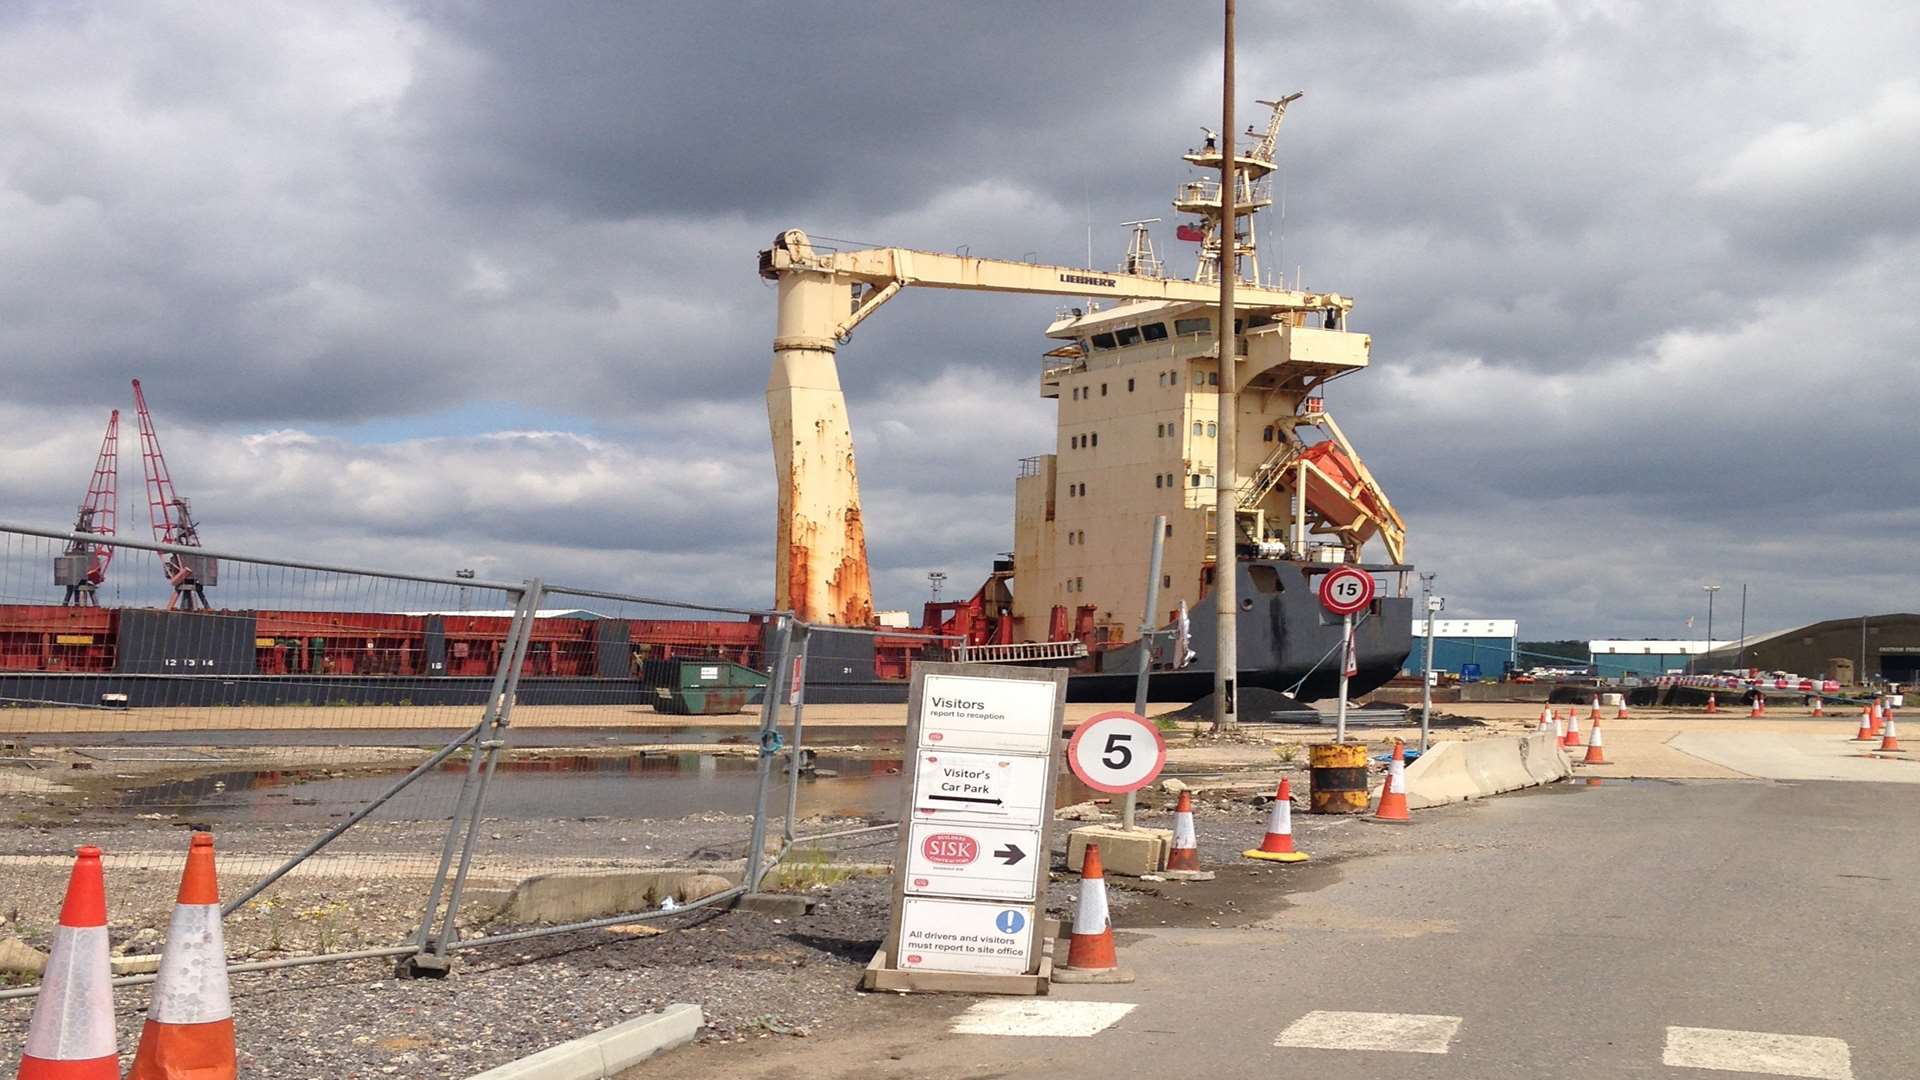 The Southern Star which is currently being kept at Chatham Docks in Gillingham